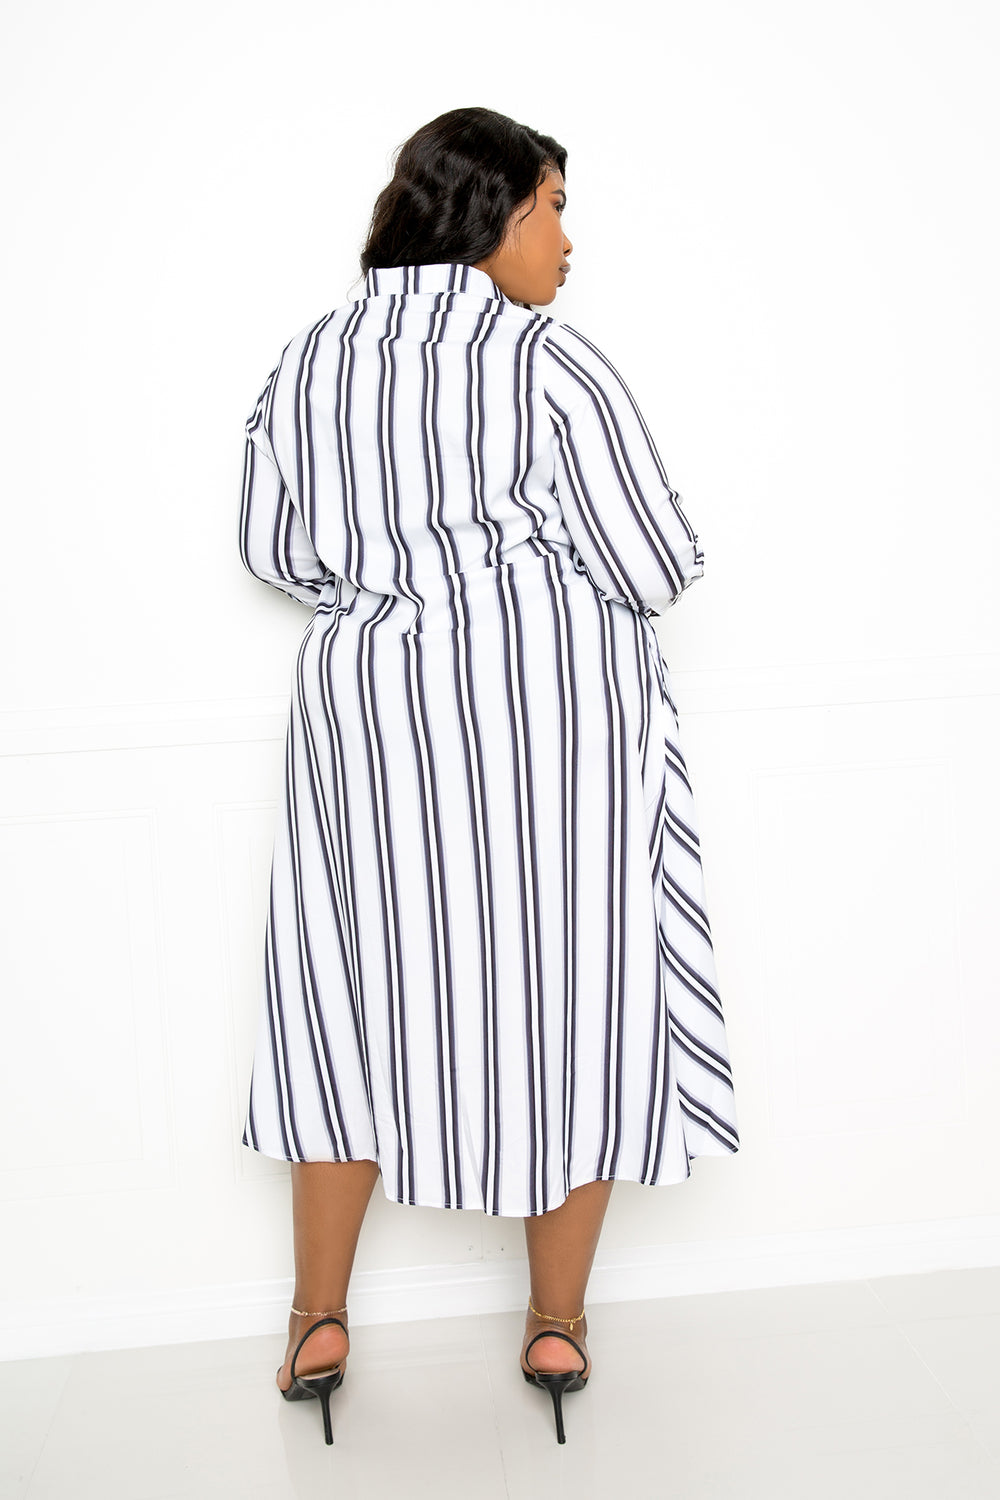 Buxom Couture Nothing To It Striped Shirt Dress in Black Dresses RYSE Clothing Co.   